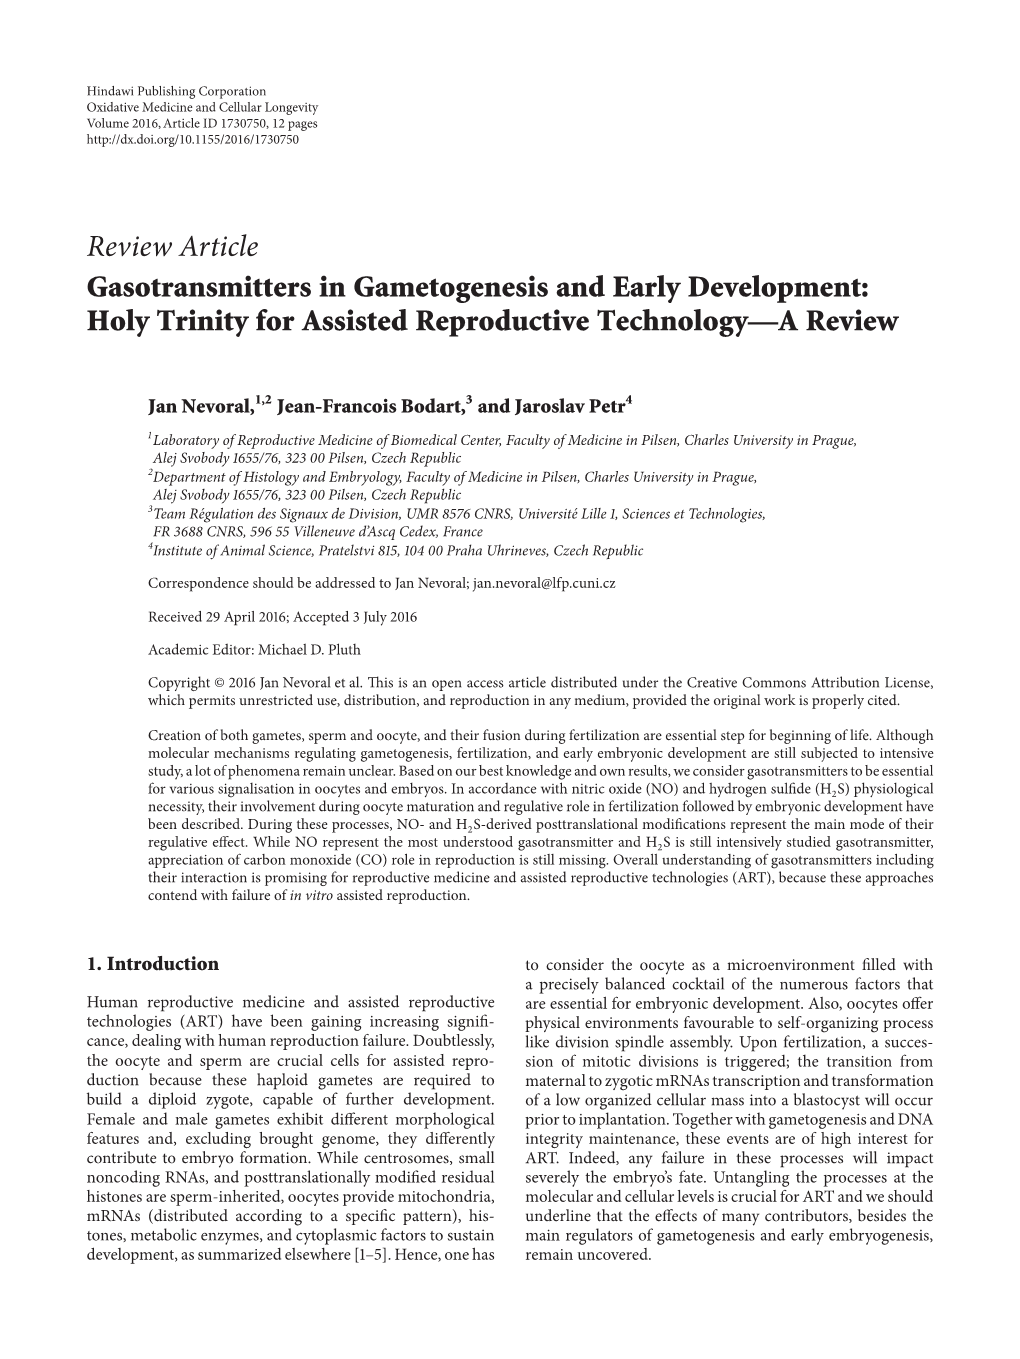 Review Article Gasotransmitters in Gametogenesis and Early Development: Holy Trinity for Assisted Reproductive Technology—A Review